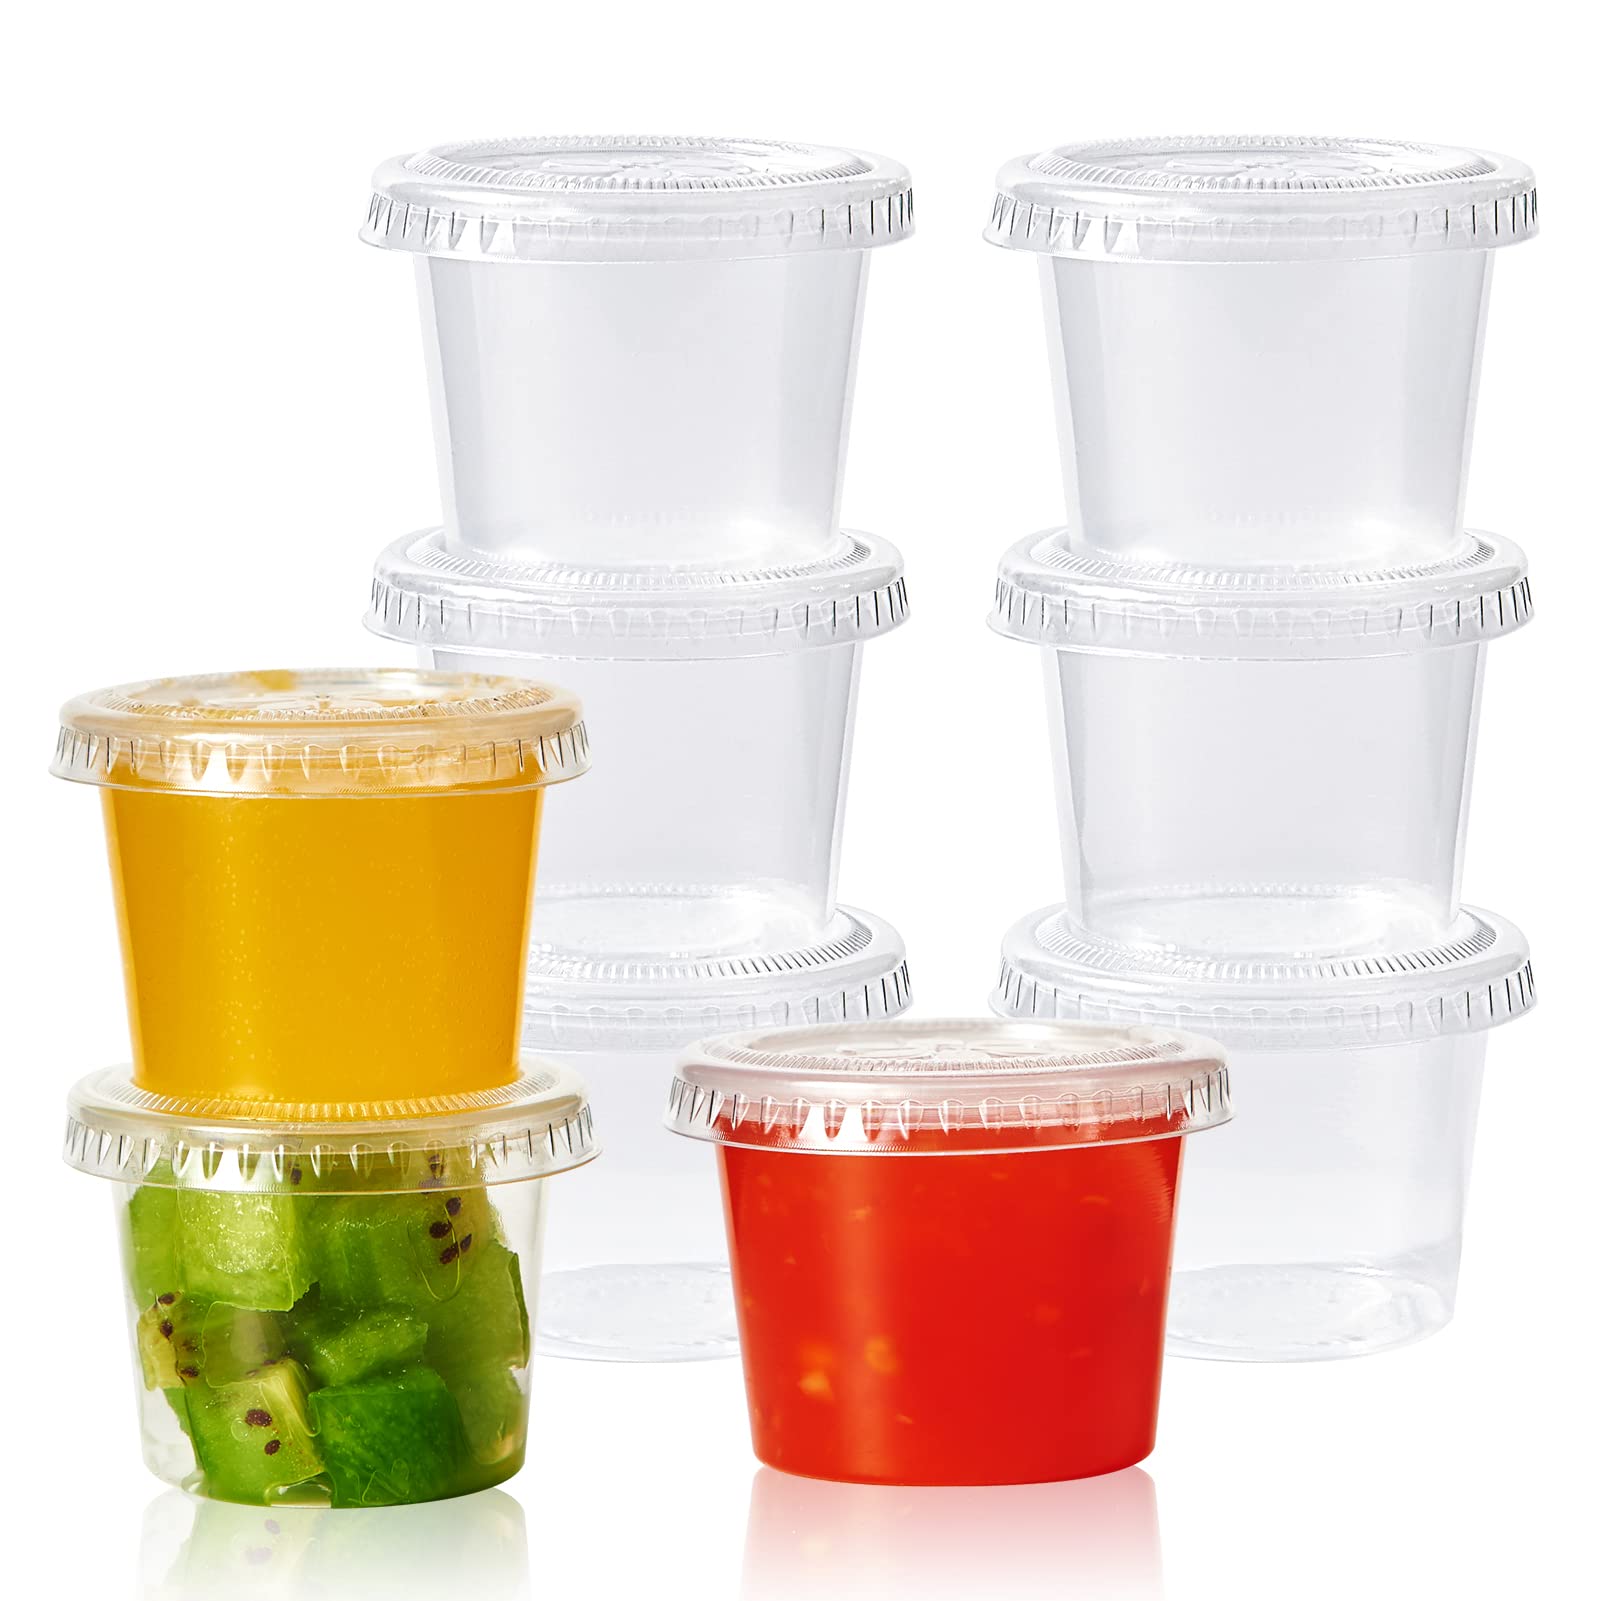 Pantry Value 100 Sets - 2 oz. Jello Shot Cups with Lids, Small